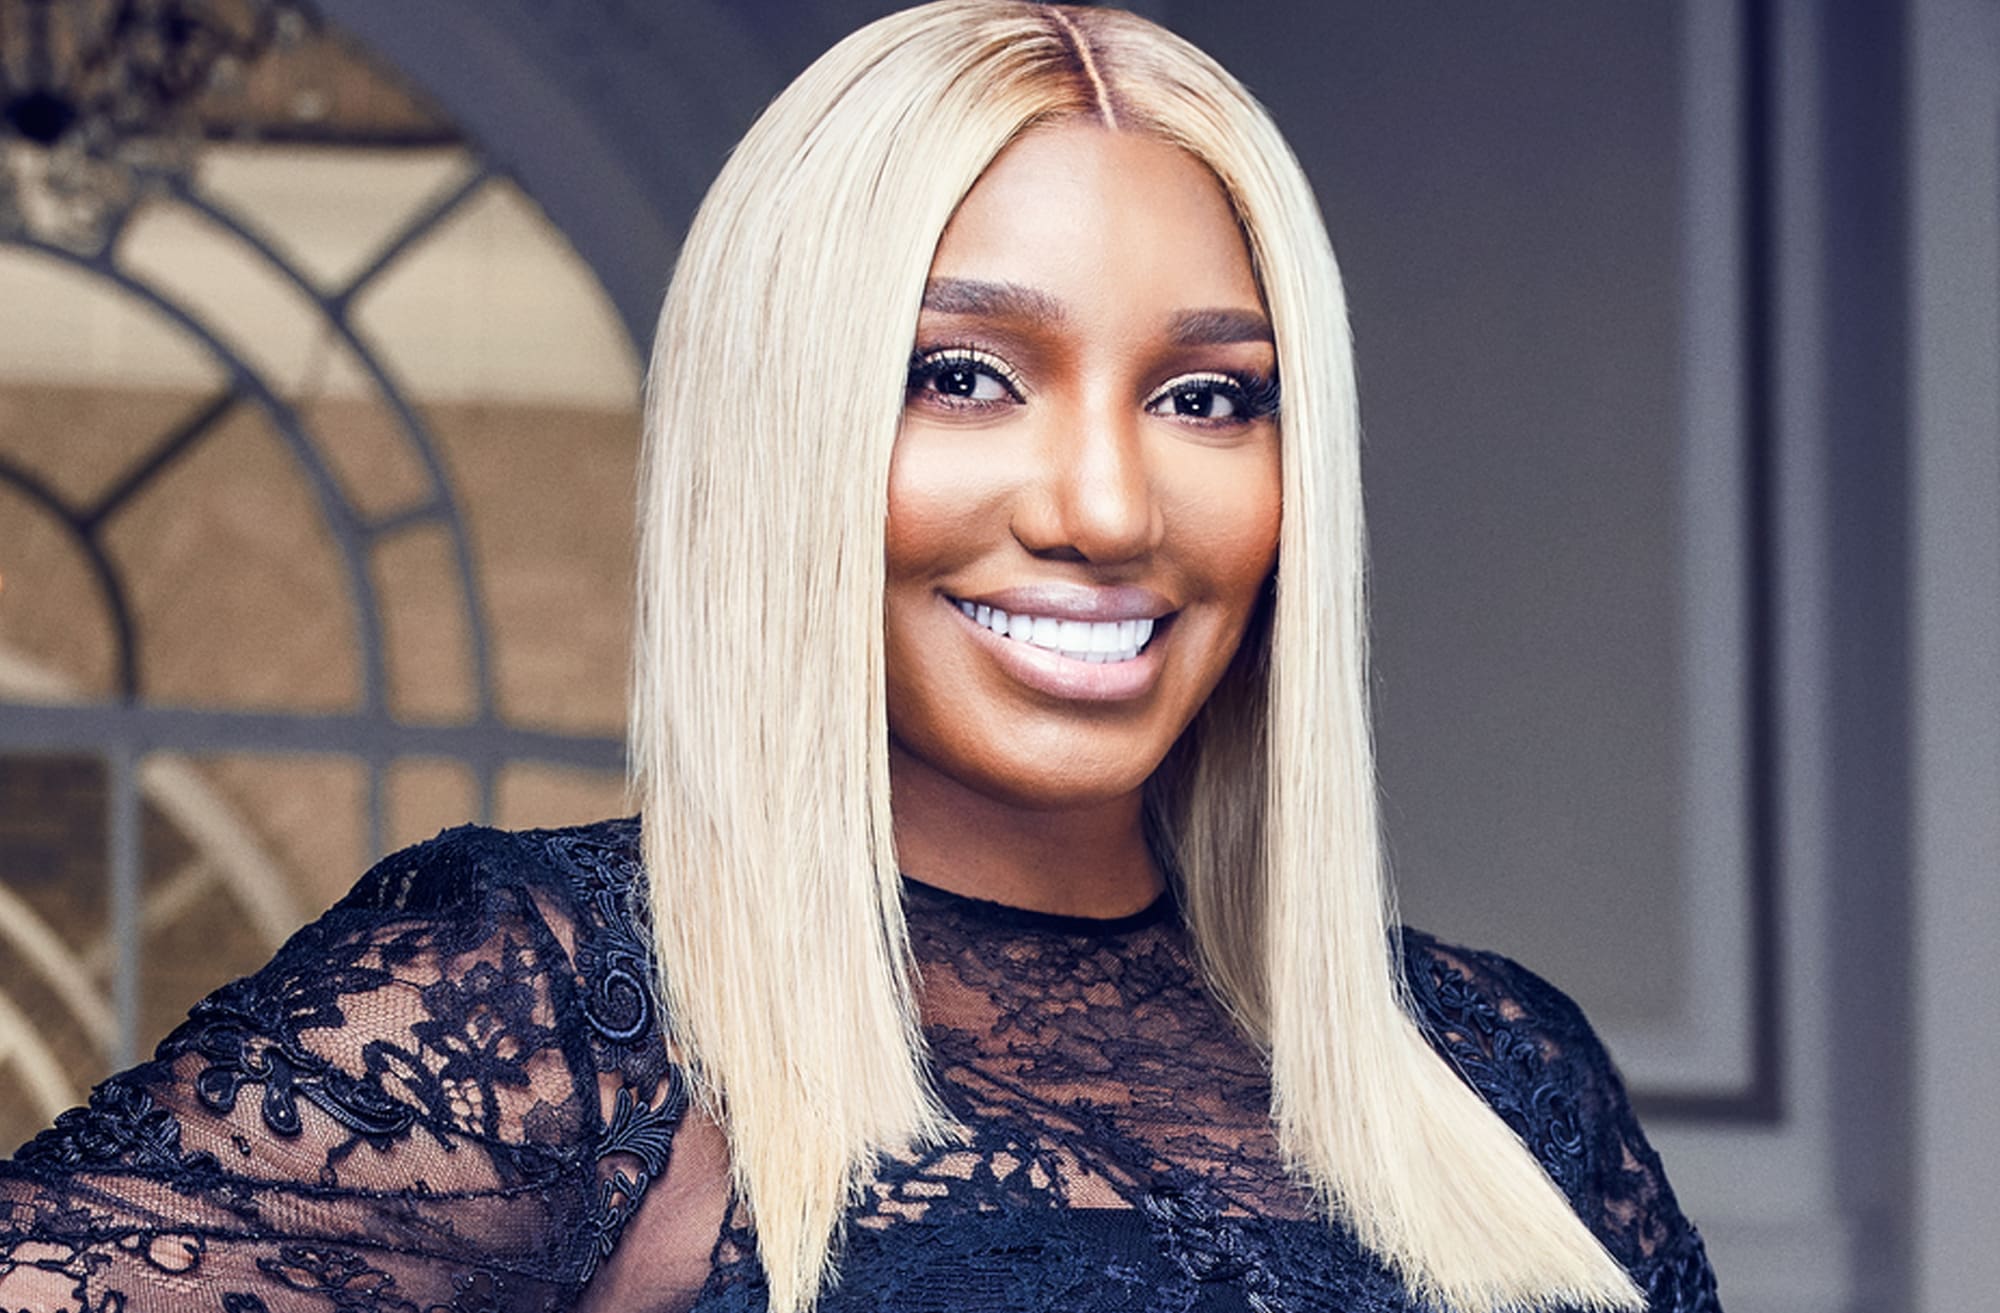 ”nene-leakes-is-spending-her-holidays-with-her-new-boo”